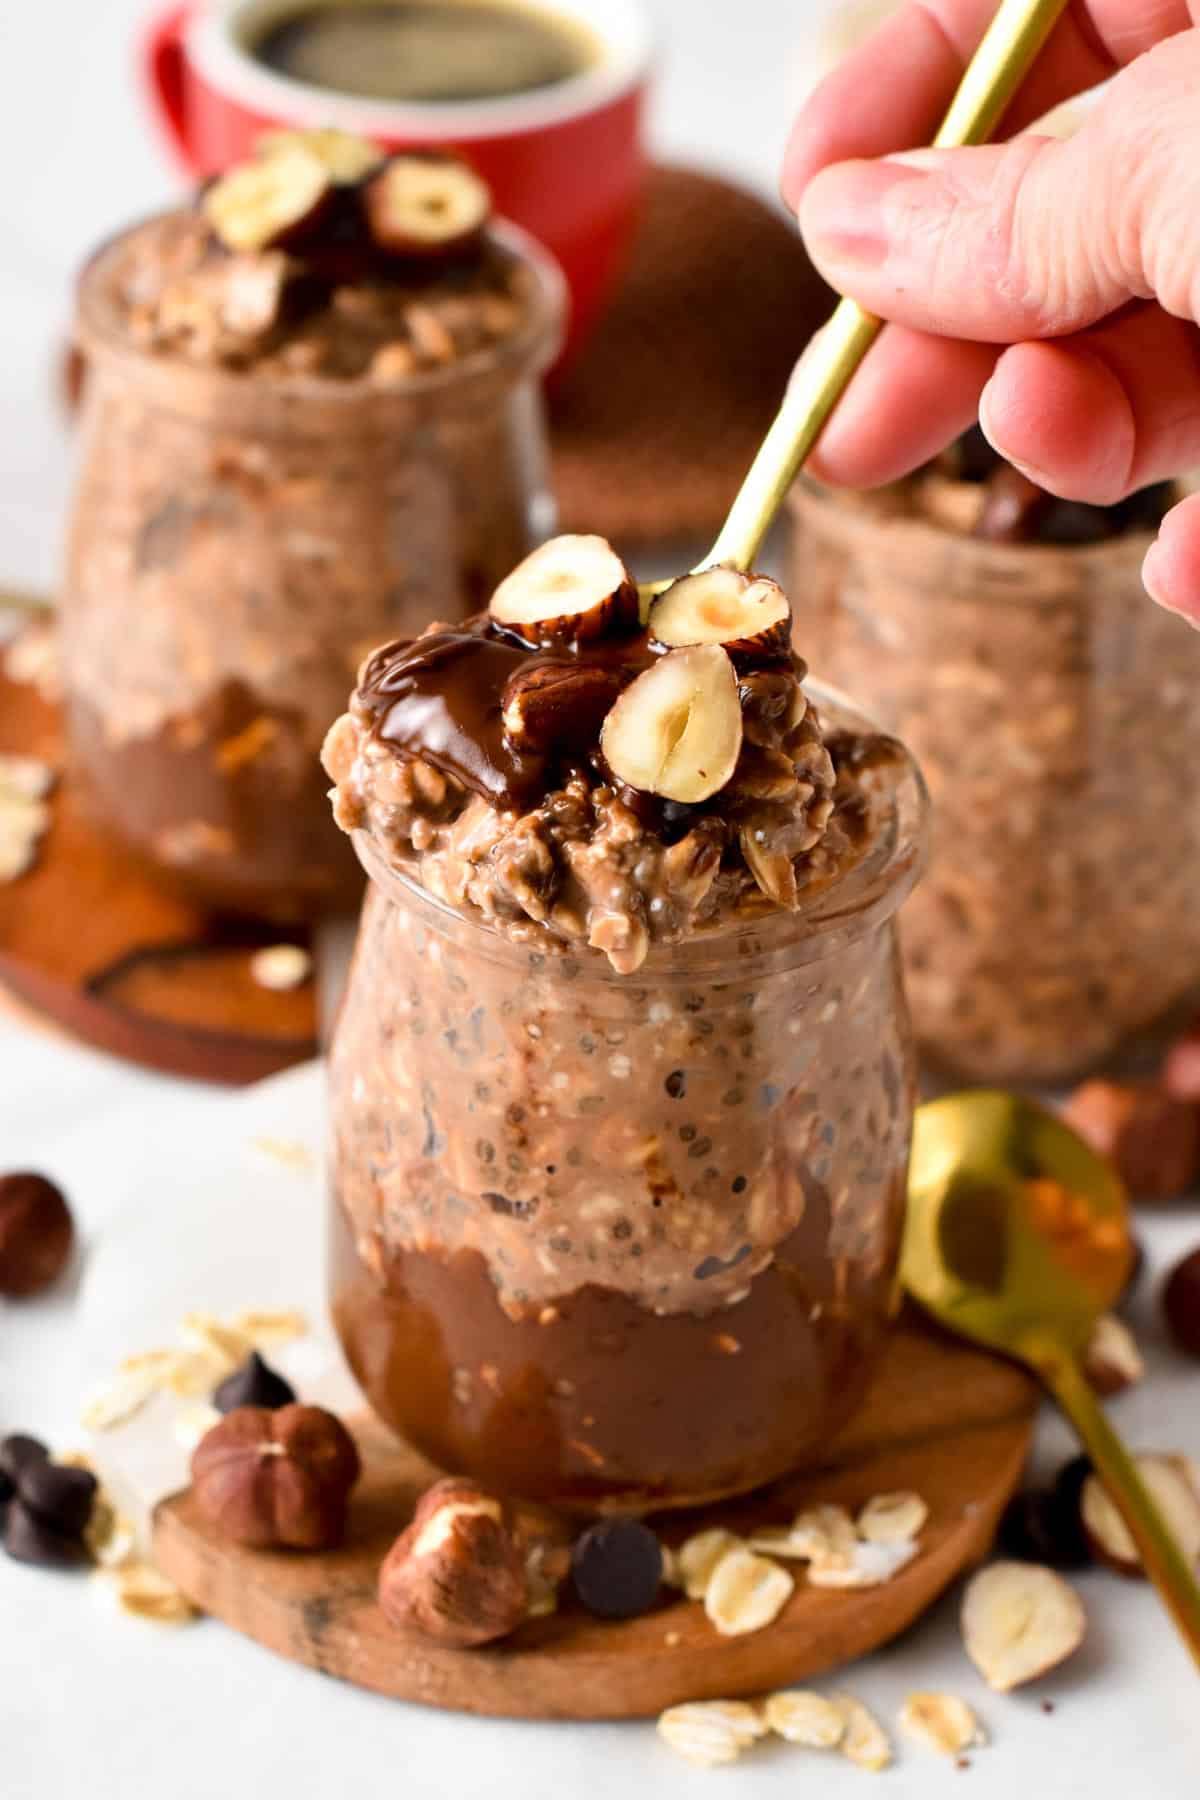 This Nutella Overnight is for the chocolate hazelnut lovers and you will fall in love with its creamy chocolate texture.